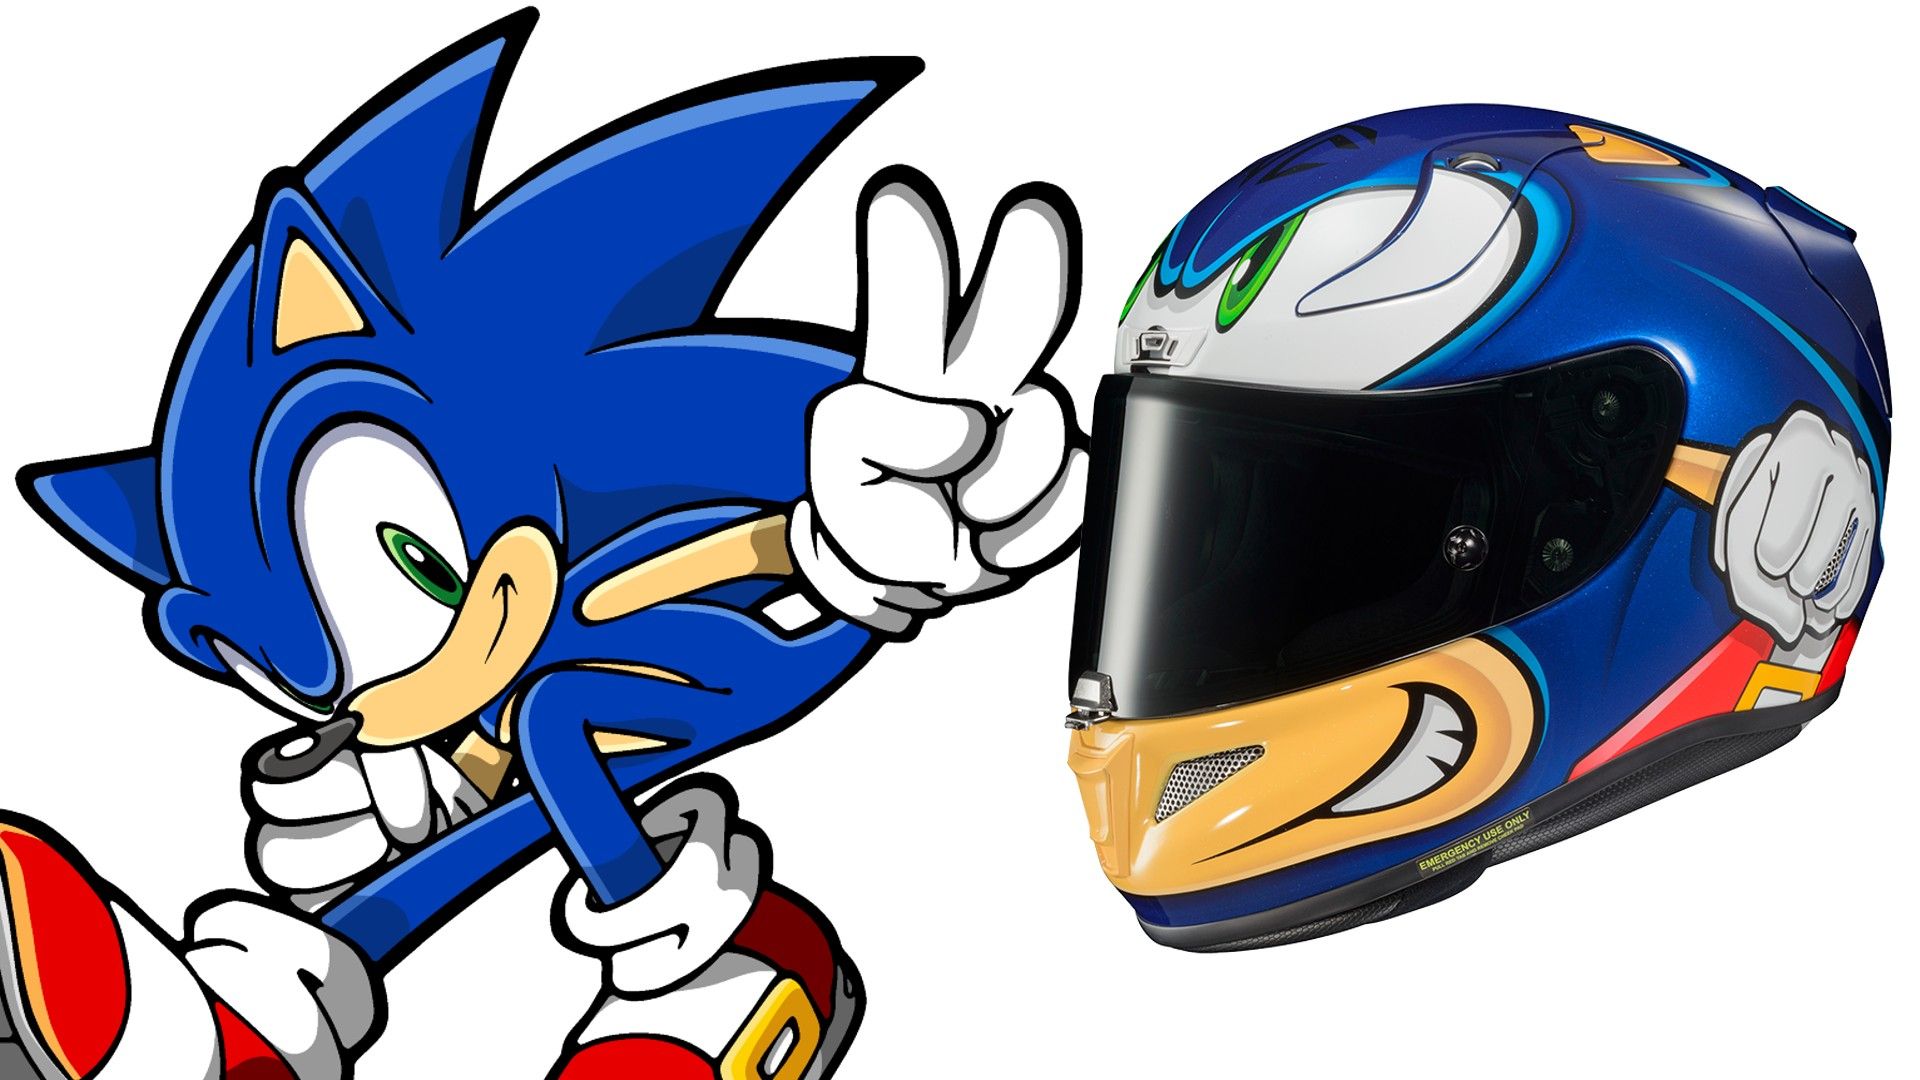 This HJC Helmet Will Rekindle Your Love For Sonic The Hedgehog